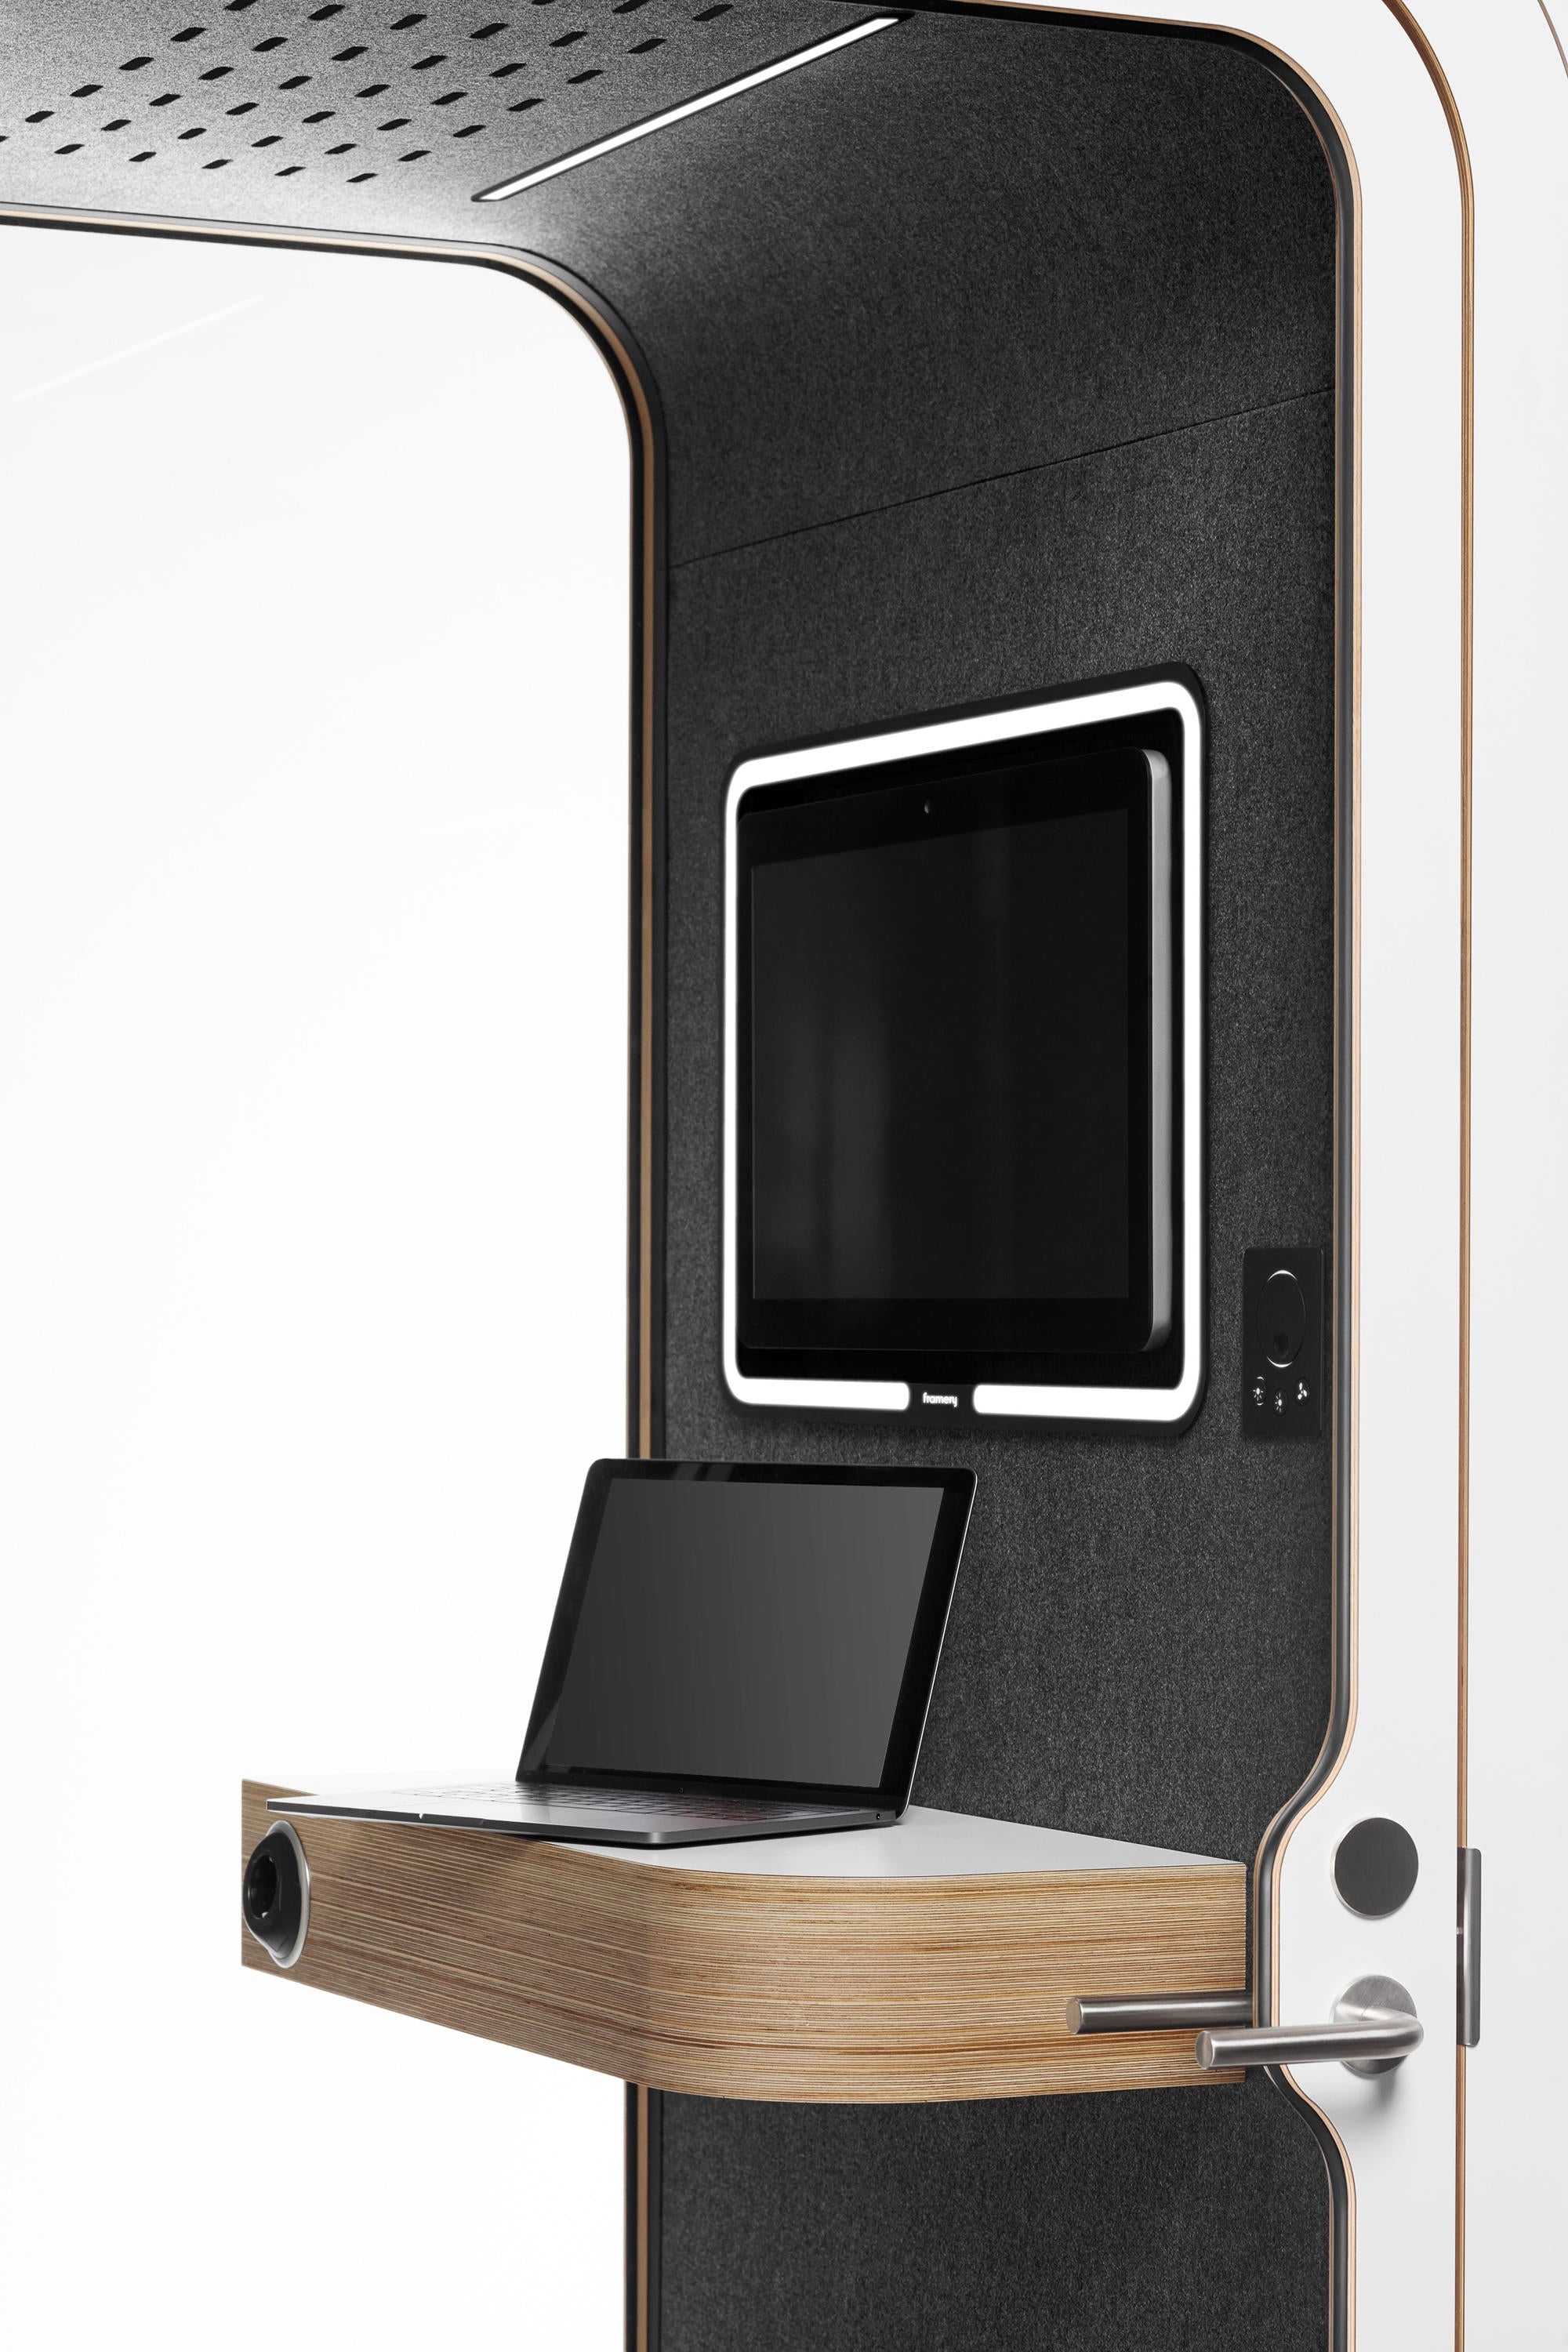 Framery O Phone Booth VCR Ready Meeting Acoustic Pod